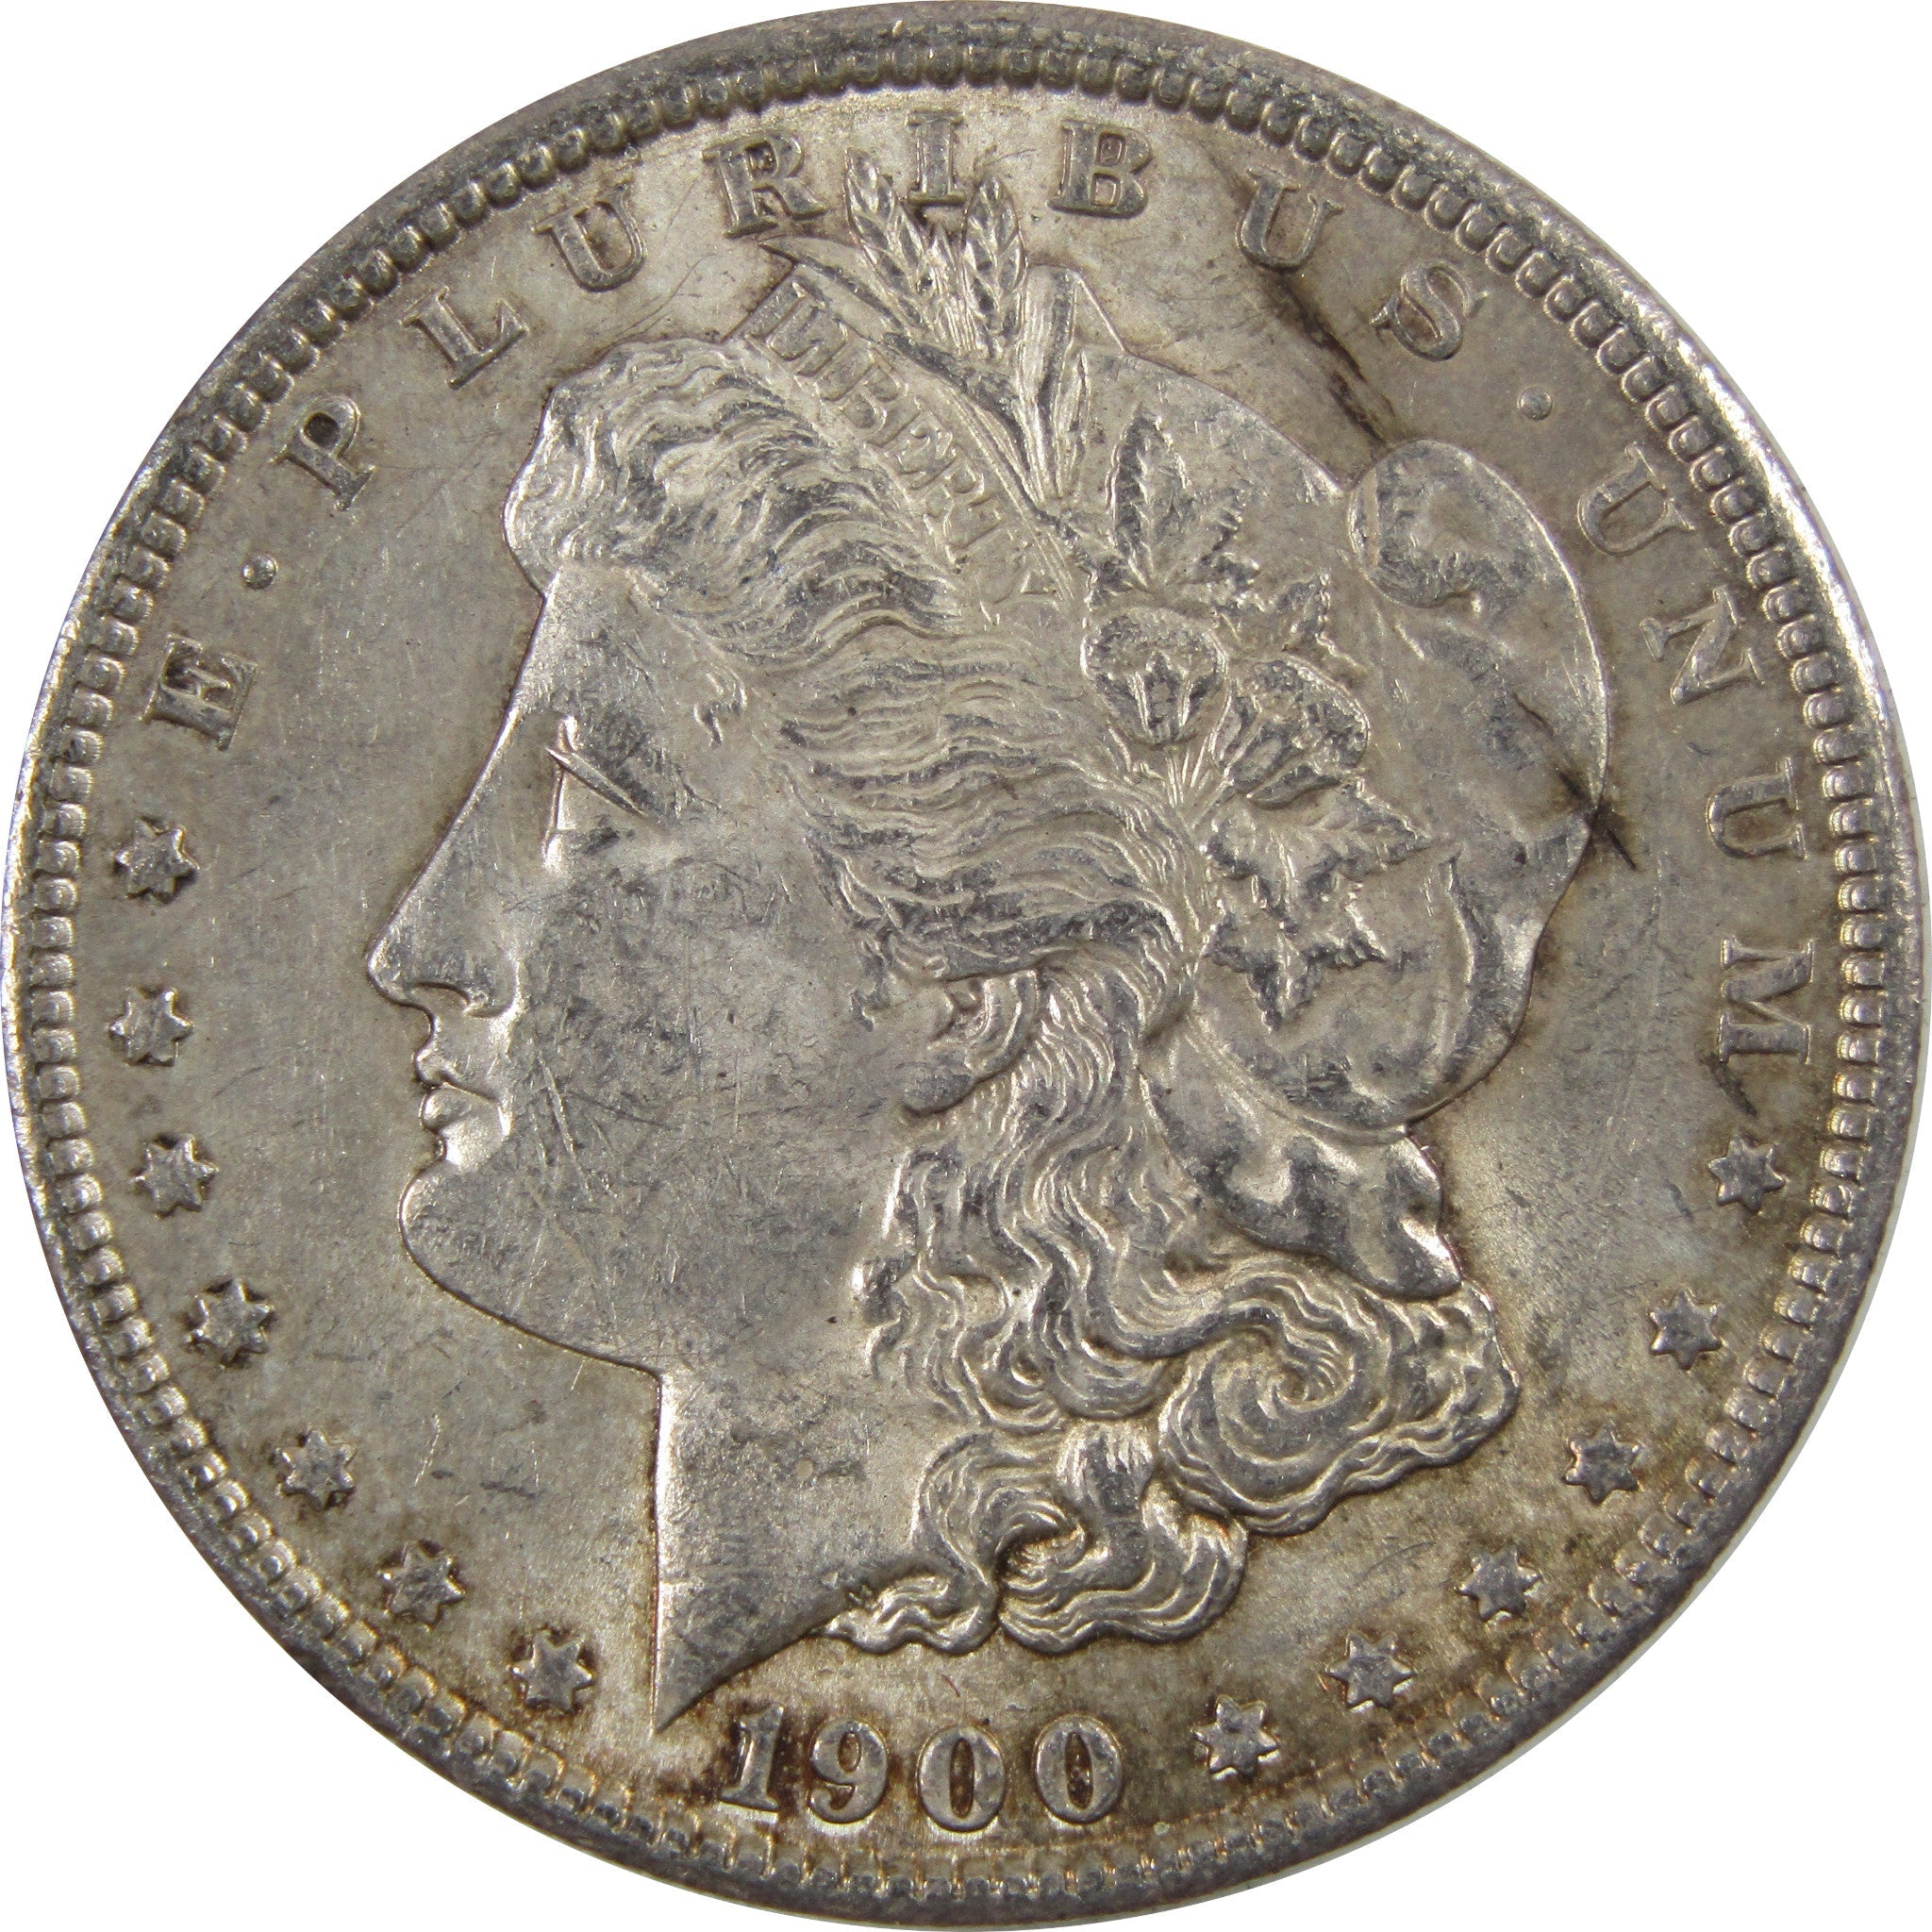 1900 Morgan Dollar AU About Uncirculated 90% Silver $1 Coin SKU:I5495 - Morgan coin - Morgan silver dollar - Morgan silver dollar for sale - Profile Coins &amp; Collectibles